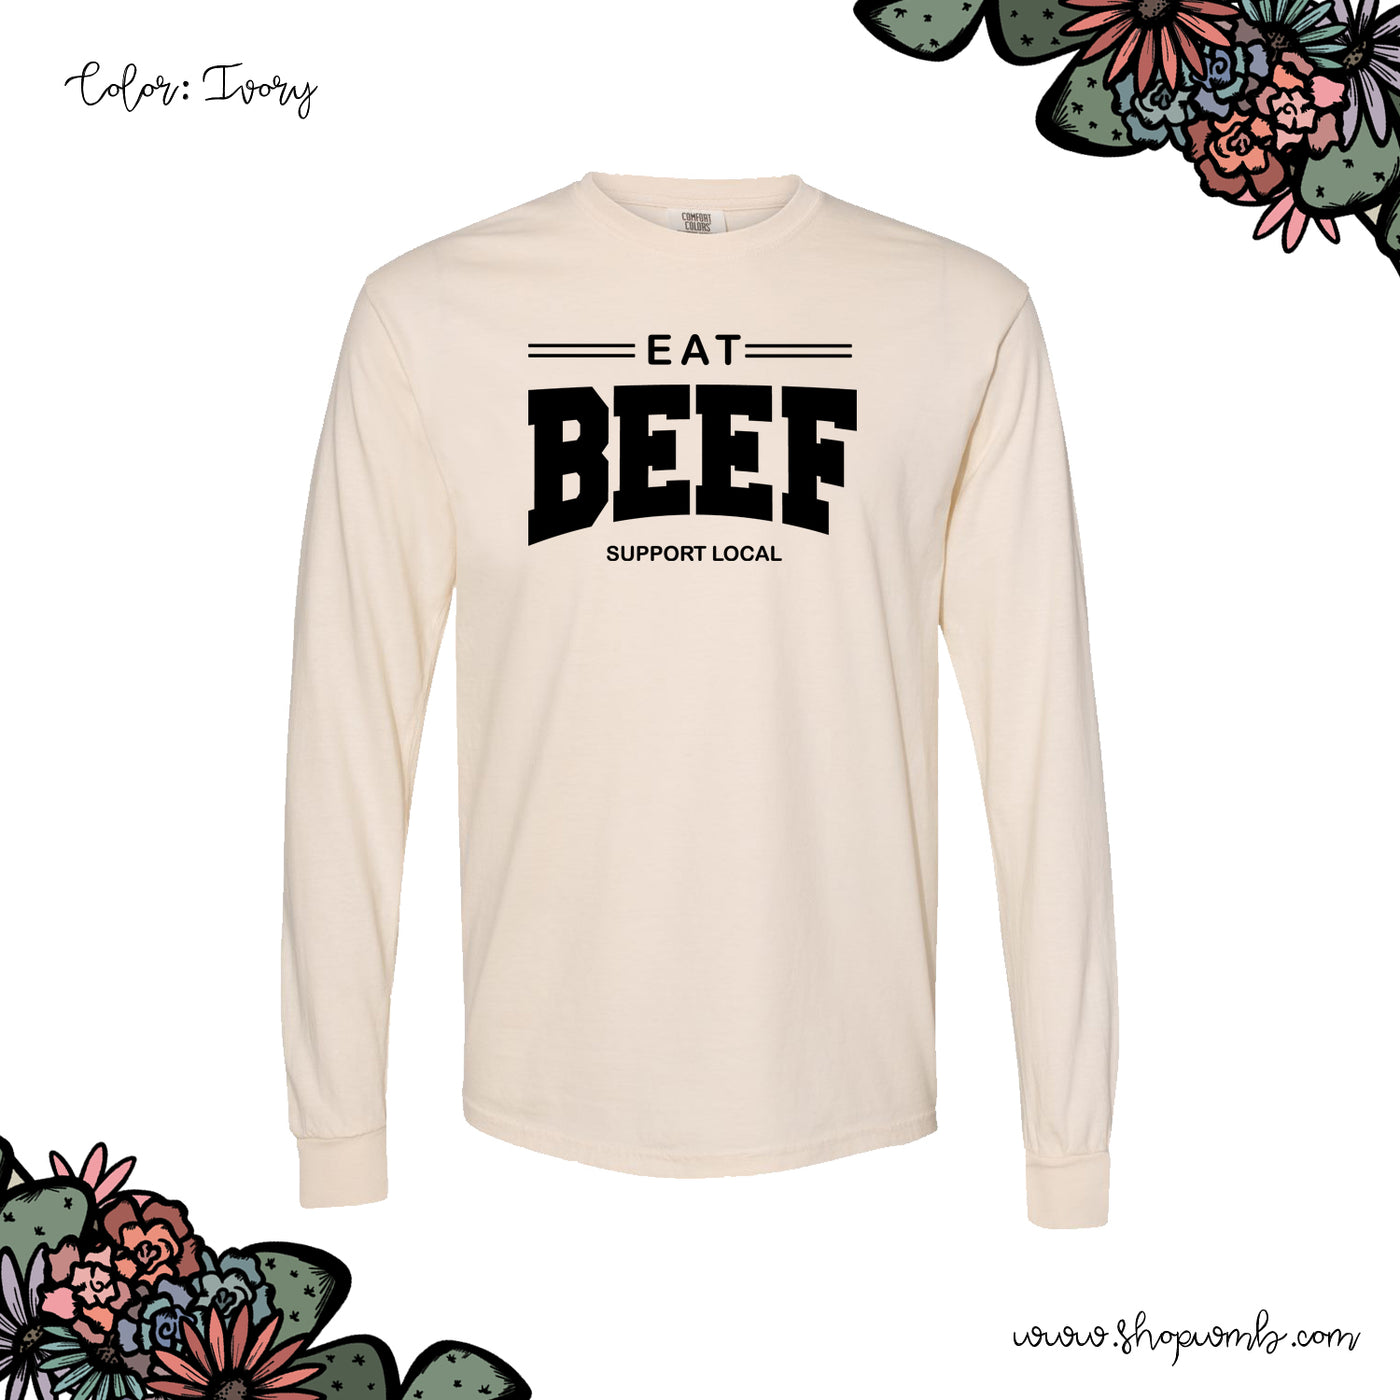 Eat Beef Support Local Black LONG SLEEVE T-Shirt (S-3XL) - Multiple Colors!